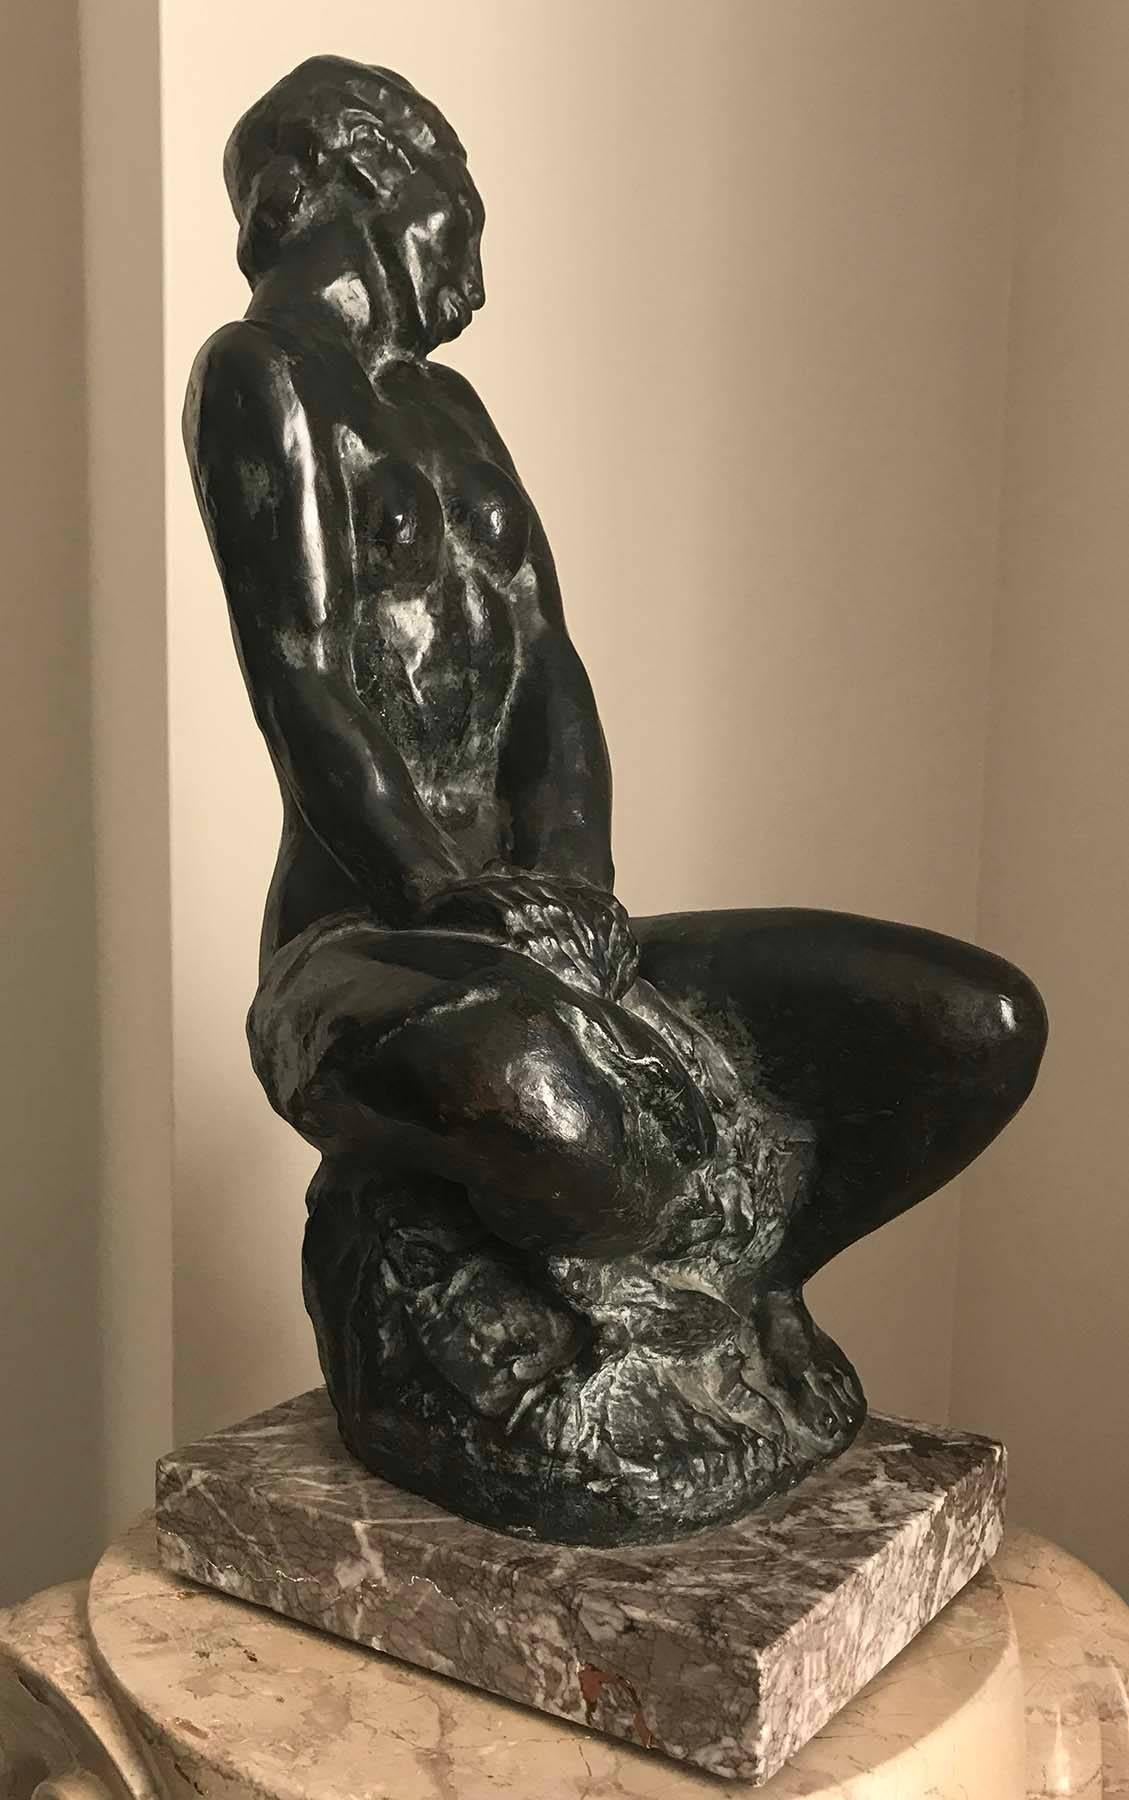 Seated Nude - Sculpture by Troiano Troiani